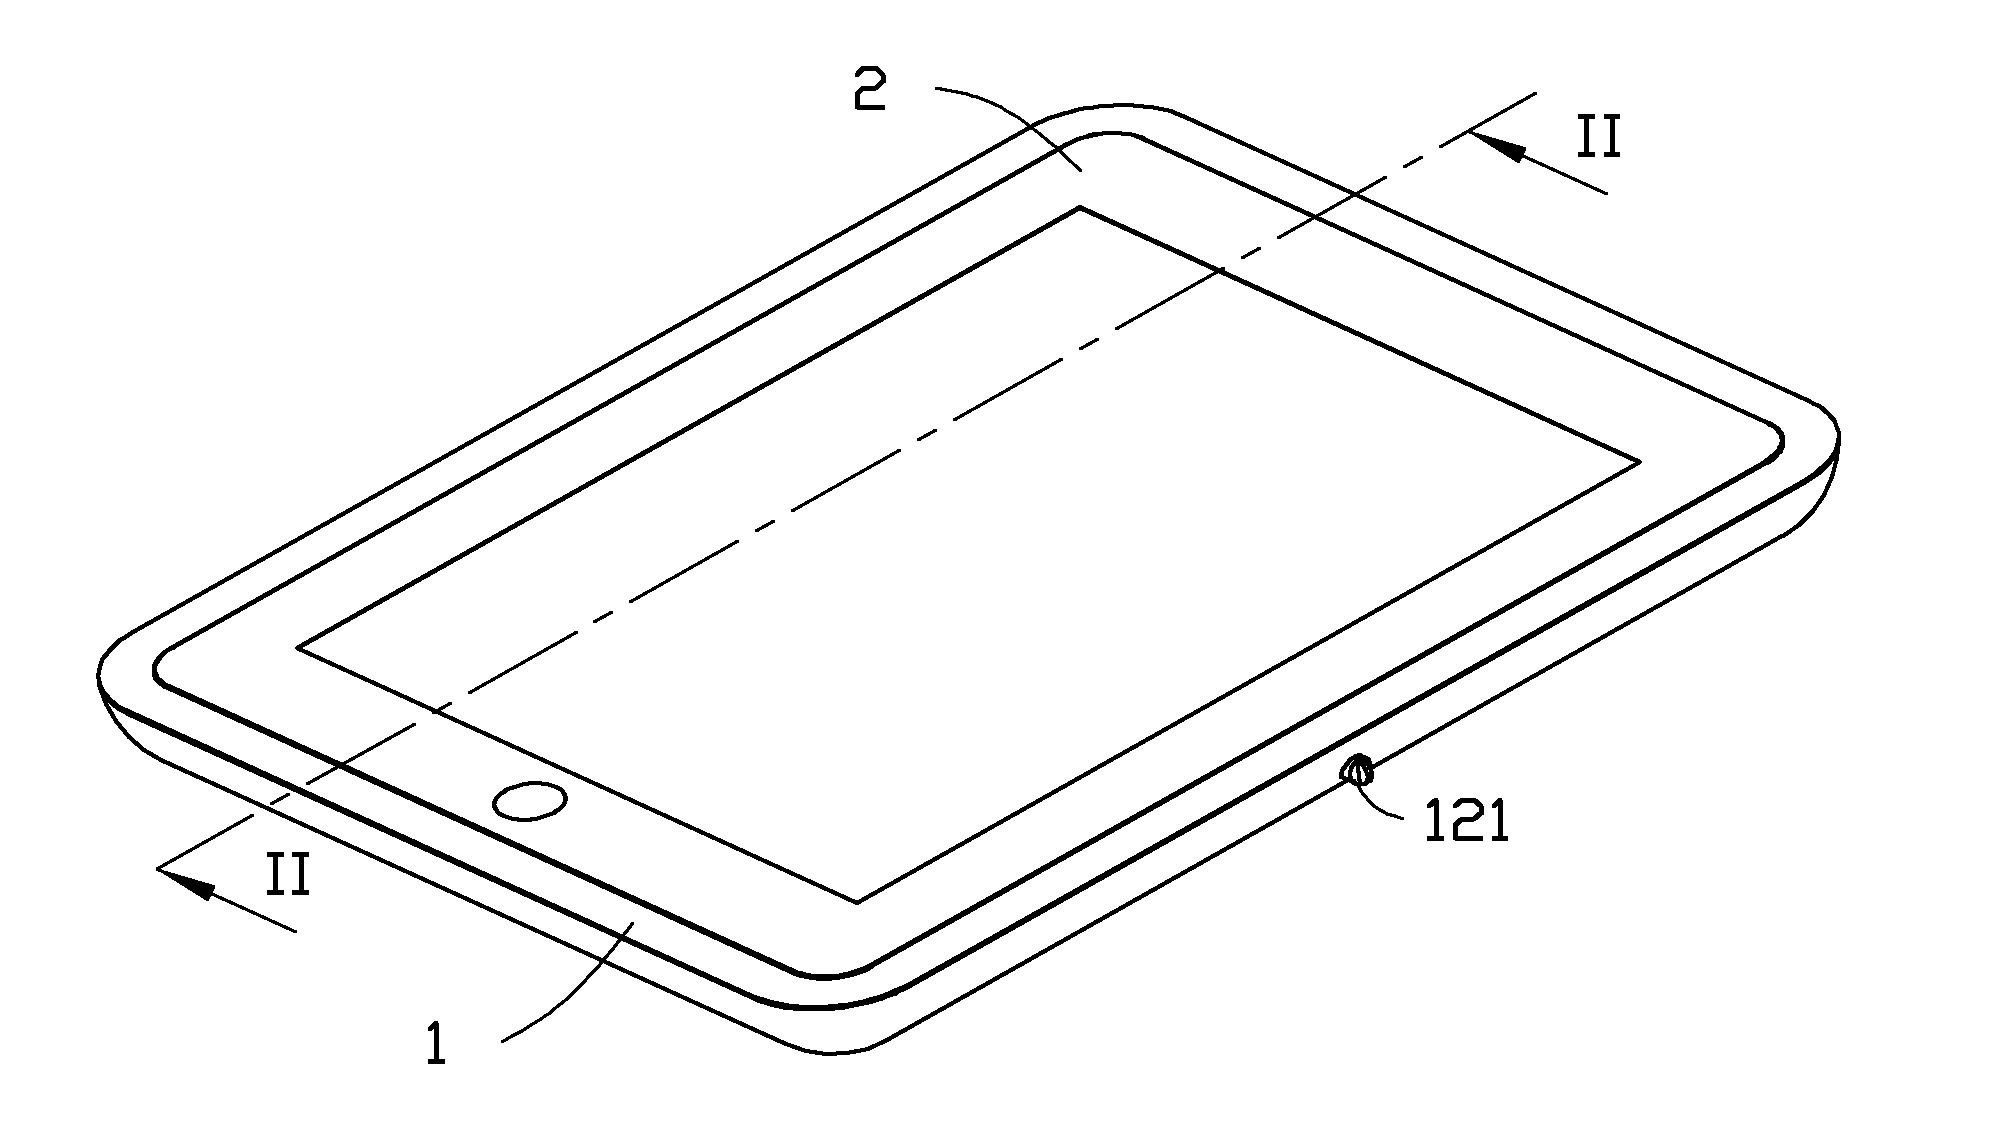 Protection case for electronic device